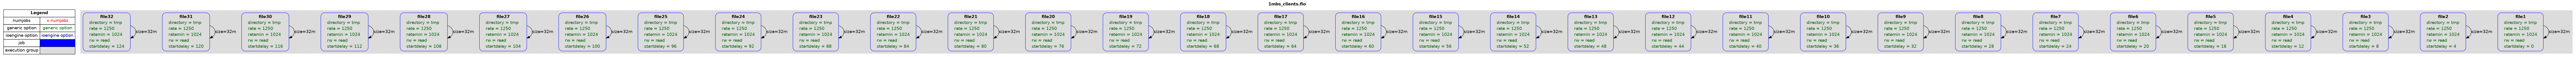 examples/1mbs_clients.png